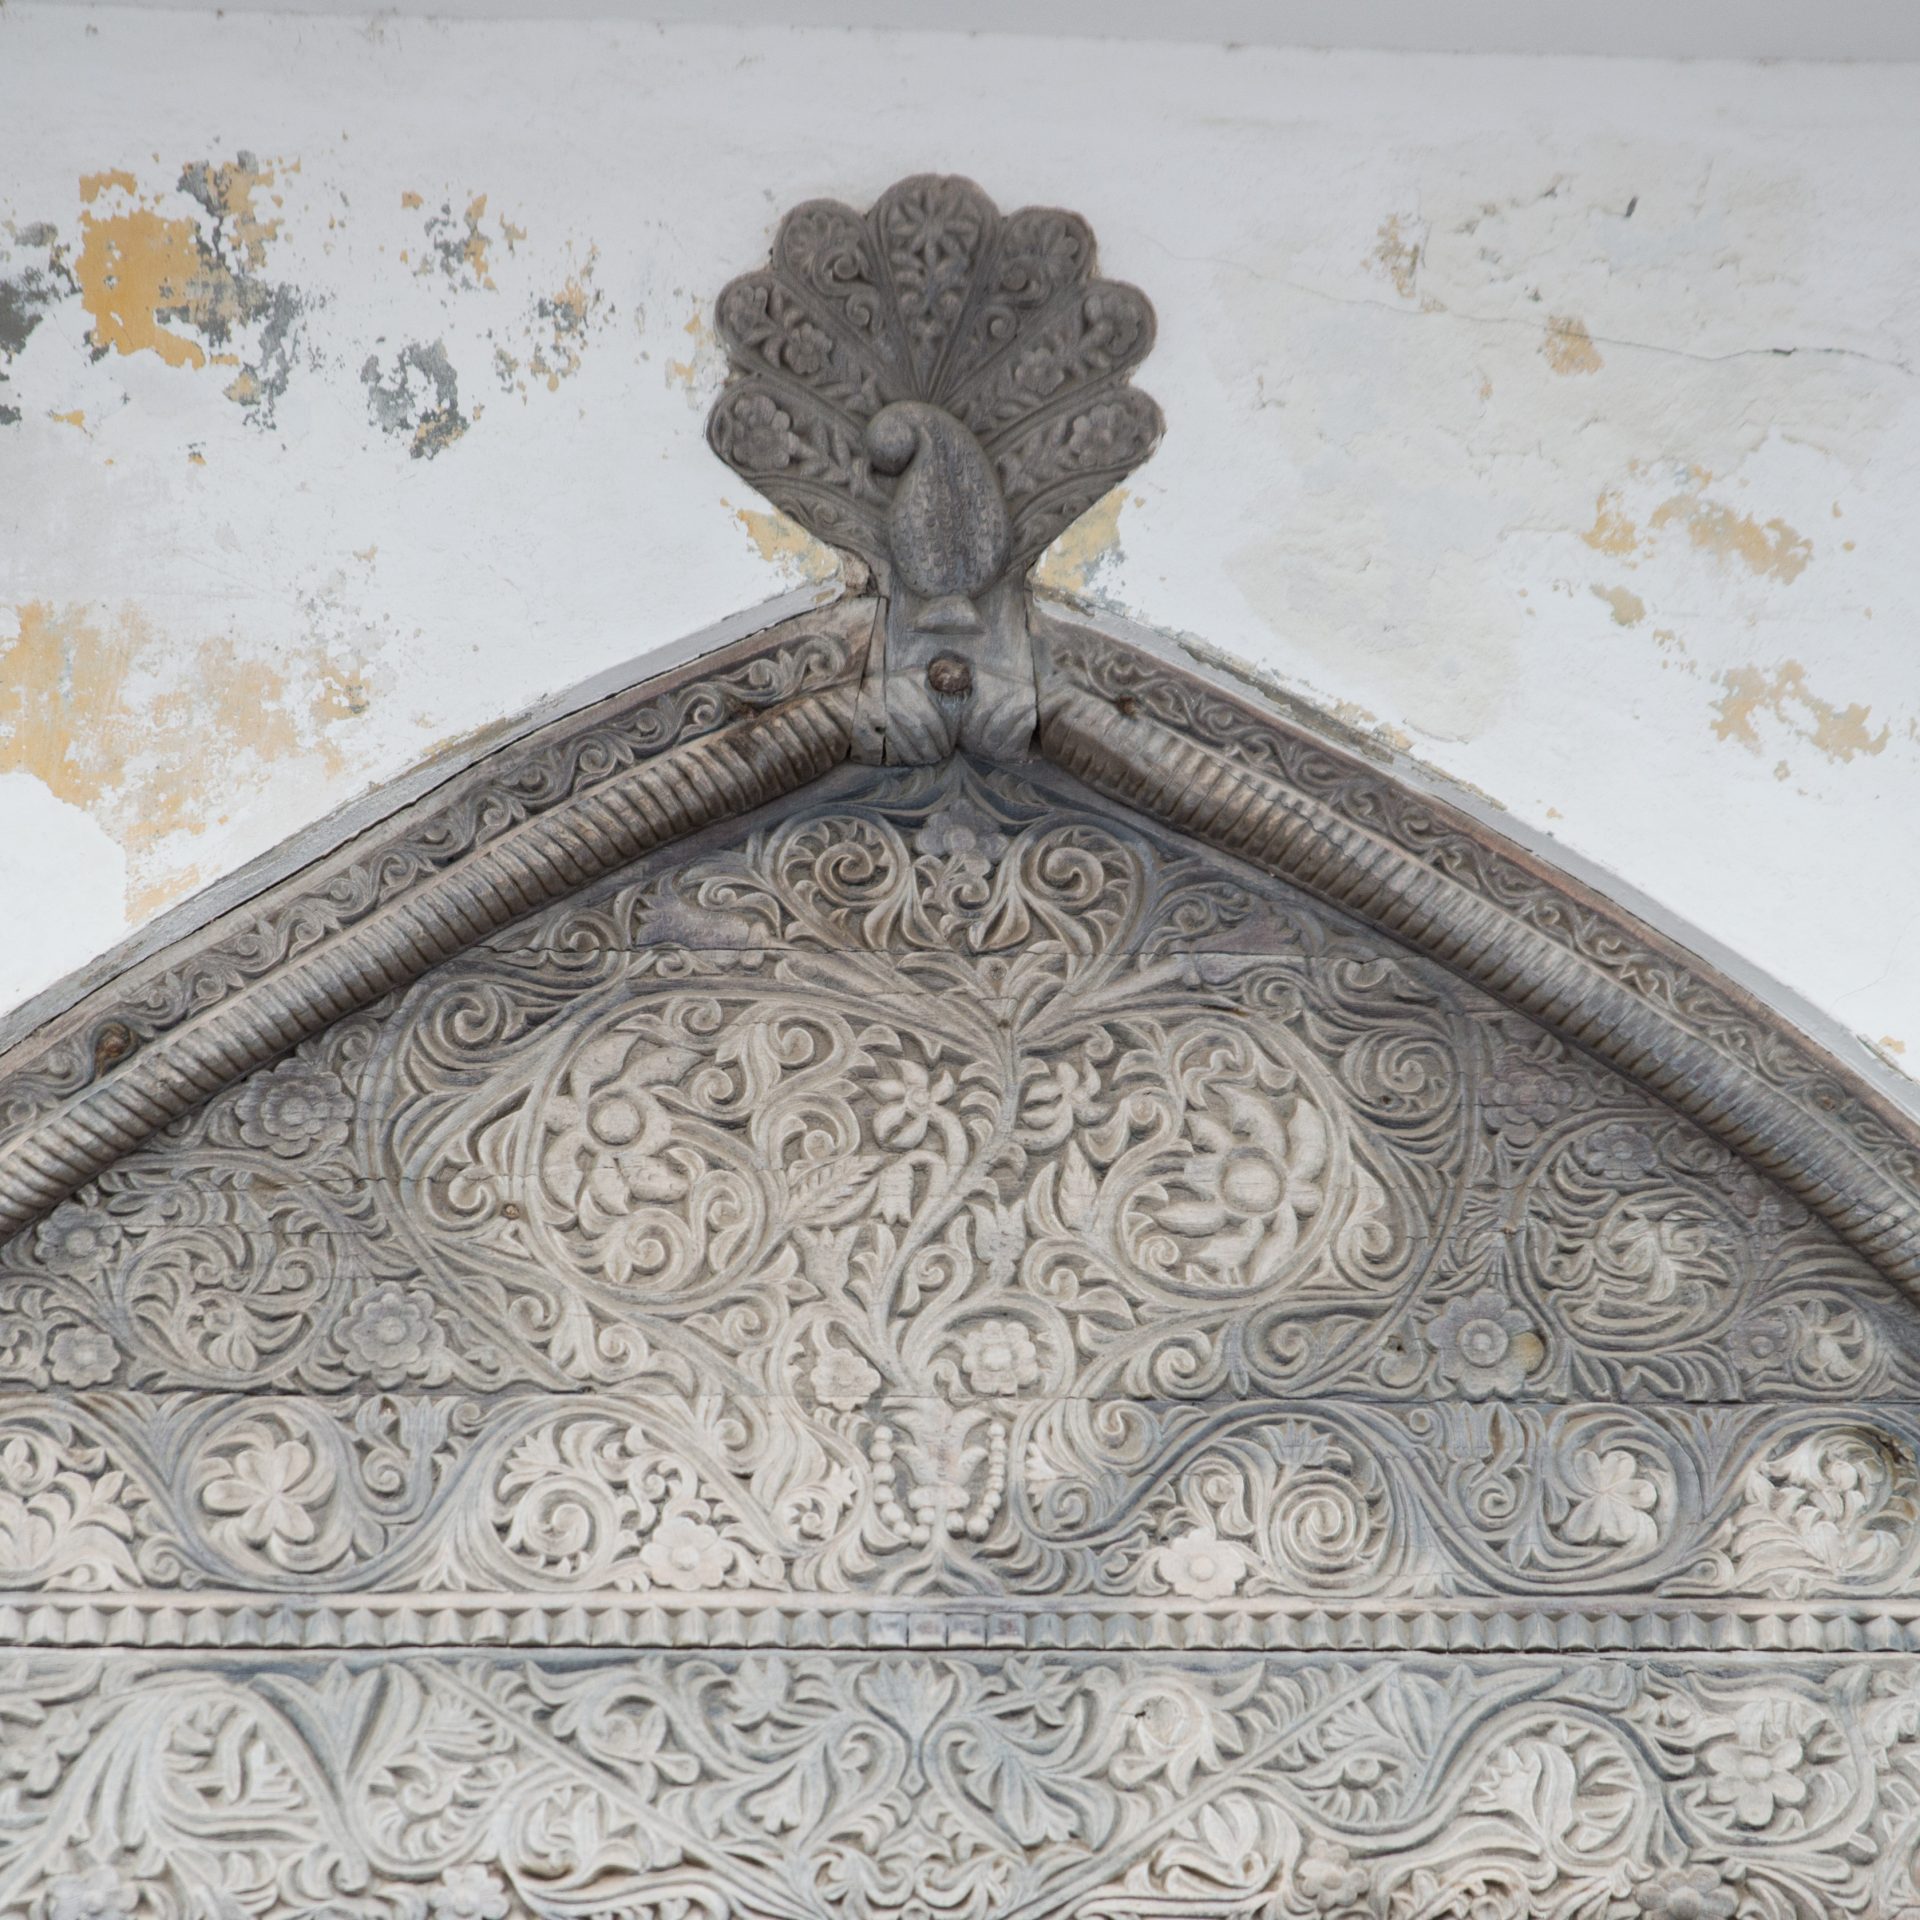 A stunning example of the intricate carvings found in Lamu